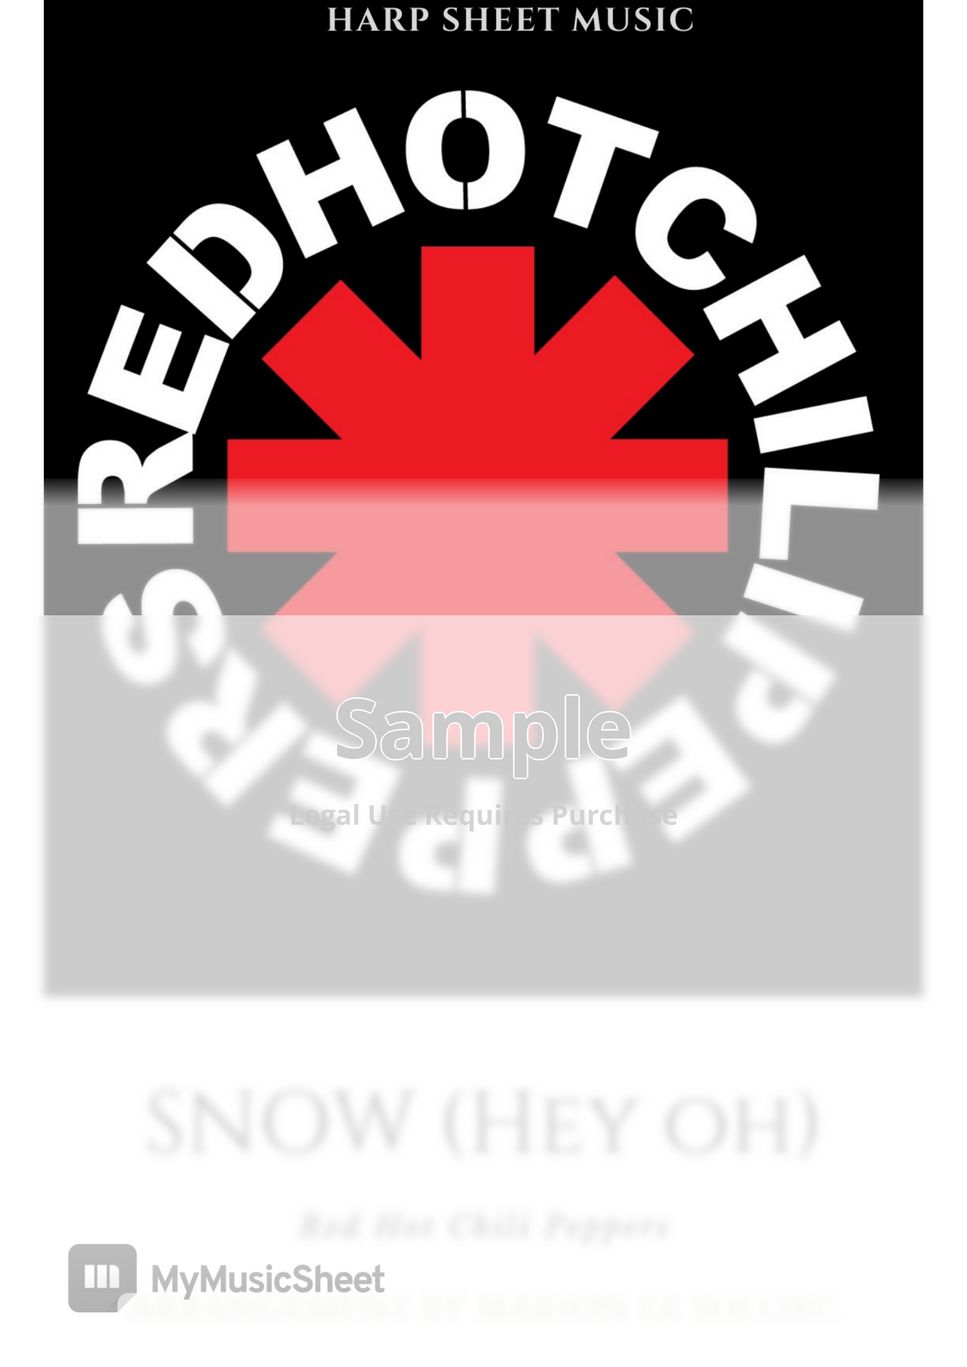 Cifra Club - Red Hot Chili Peppers - Snow (Hey Oh), PDF, American Musical  Groups